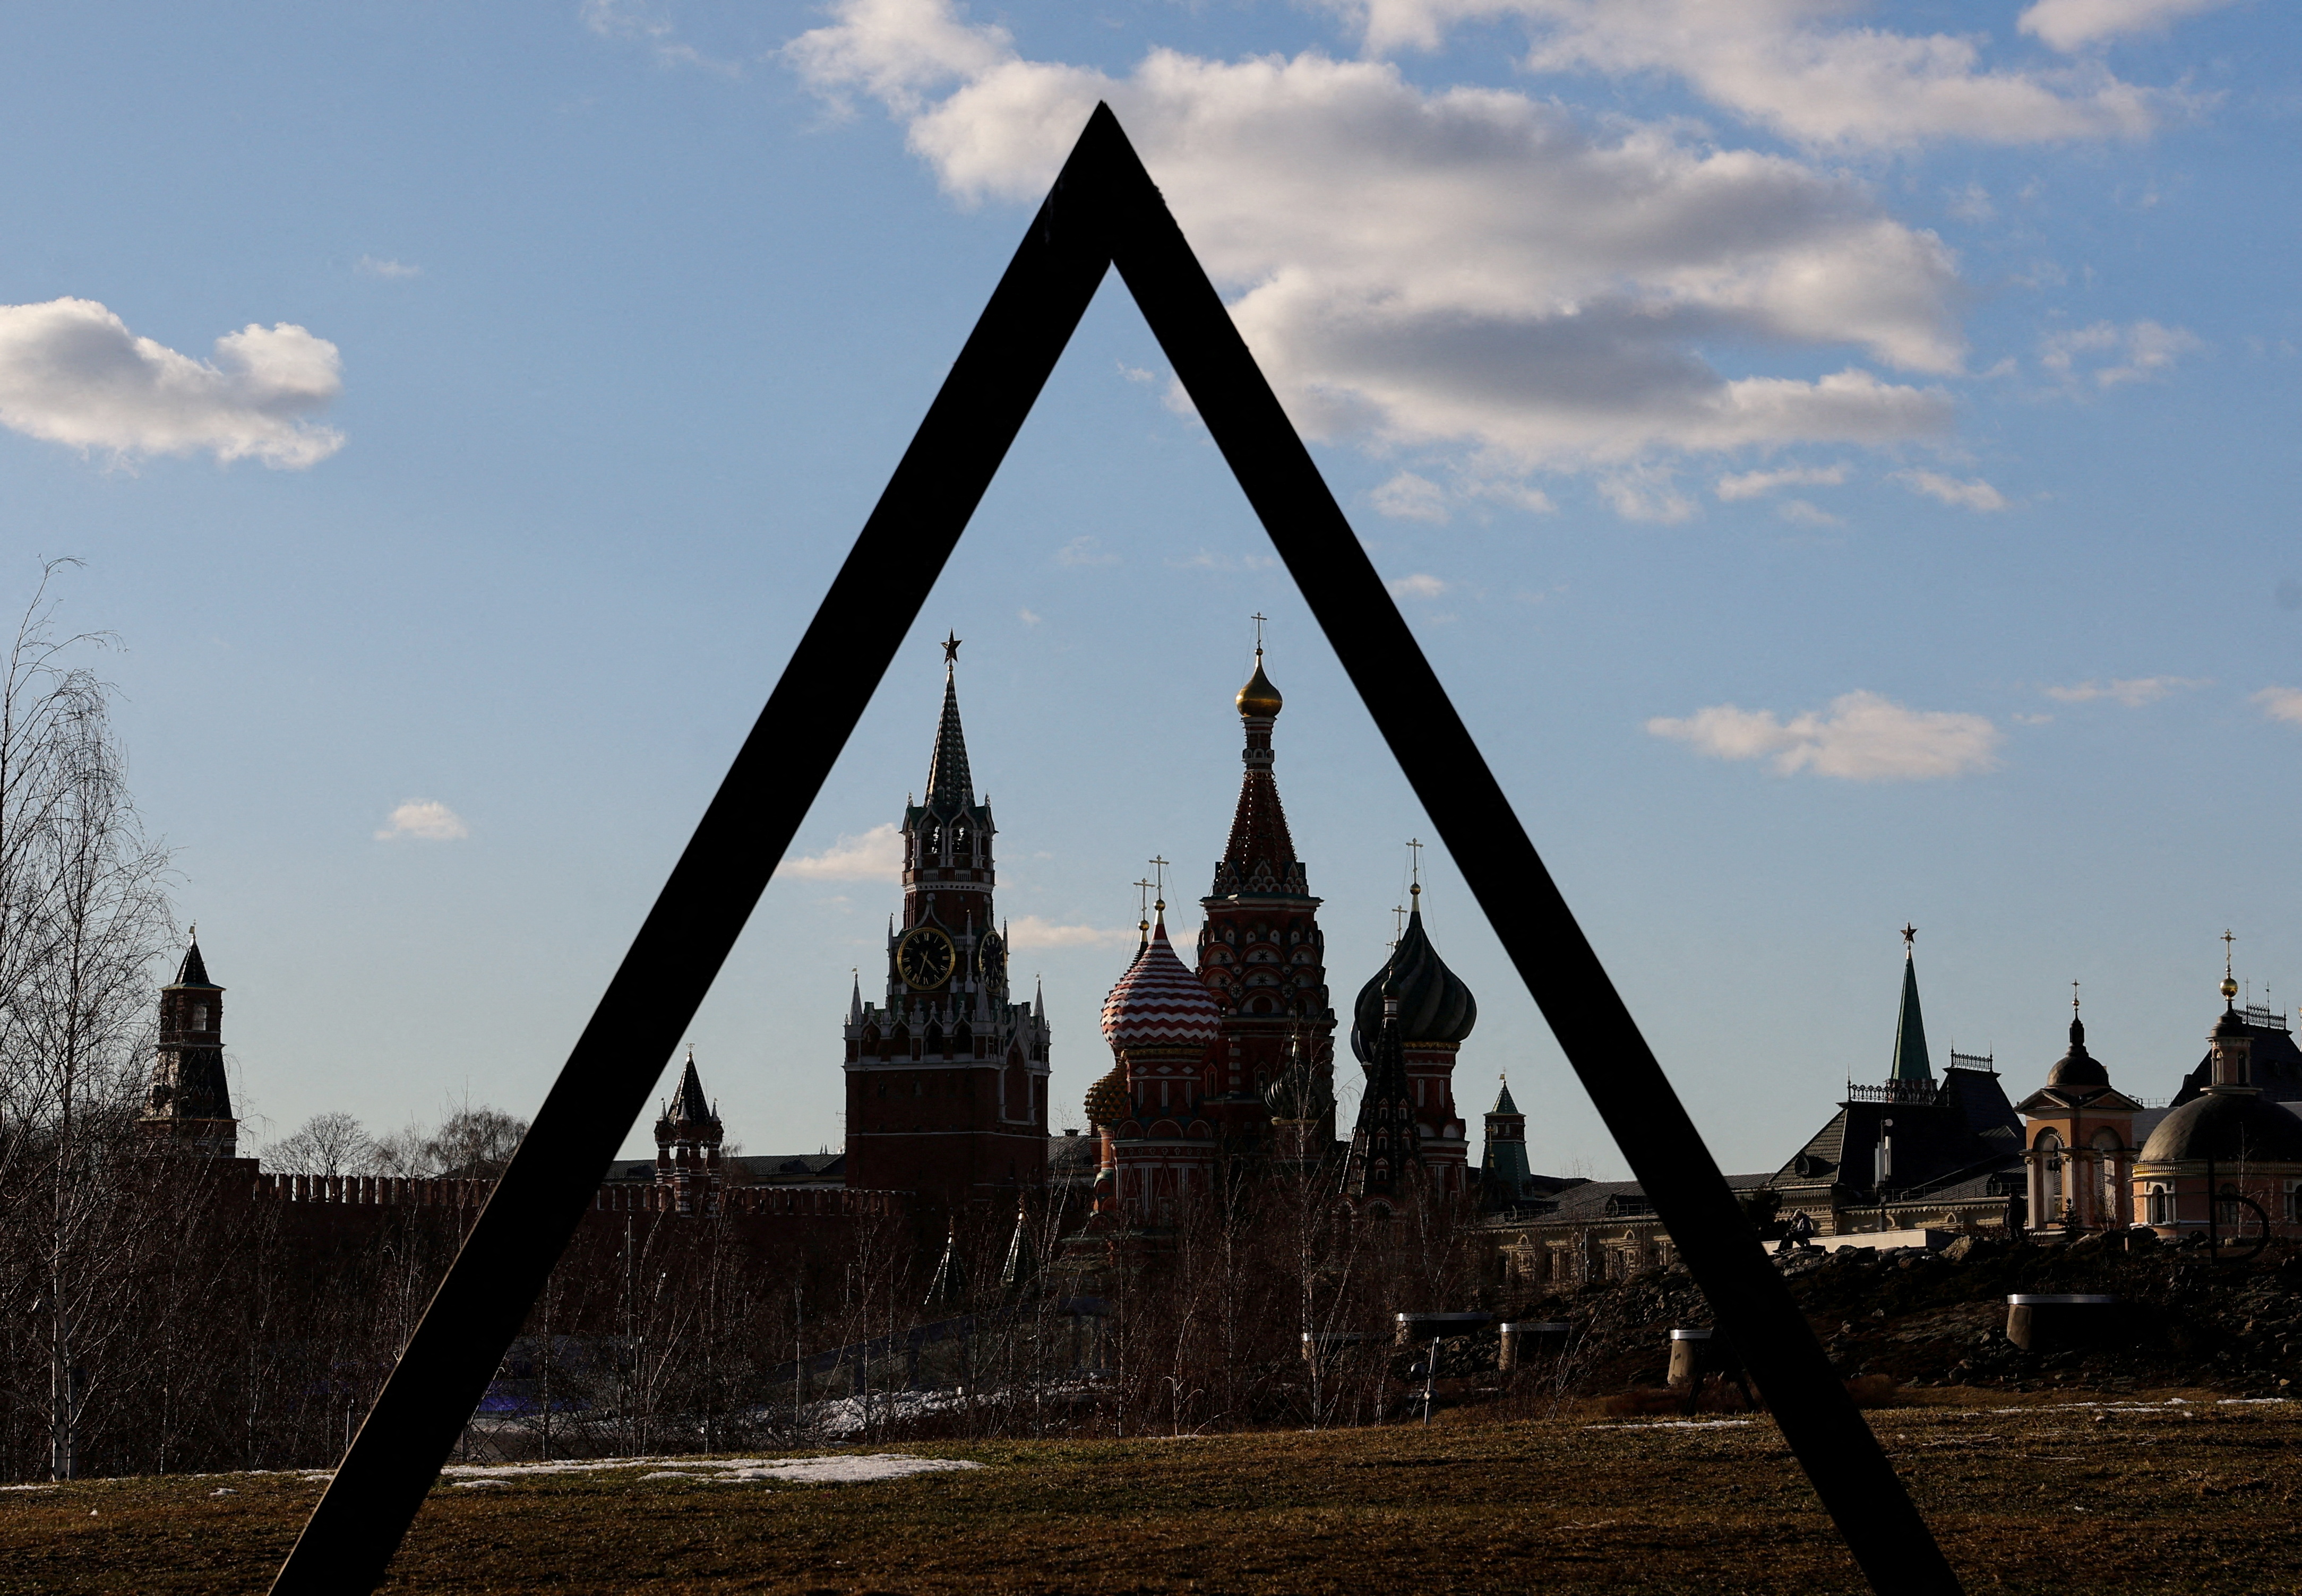 The Kremlin's Spasskaya Tower and St. Basil's Cathedral are seen through the art object in Zaryadye park in Moscow